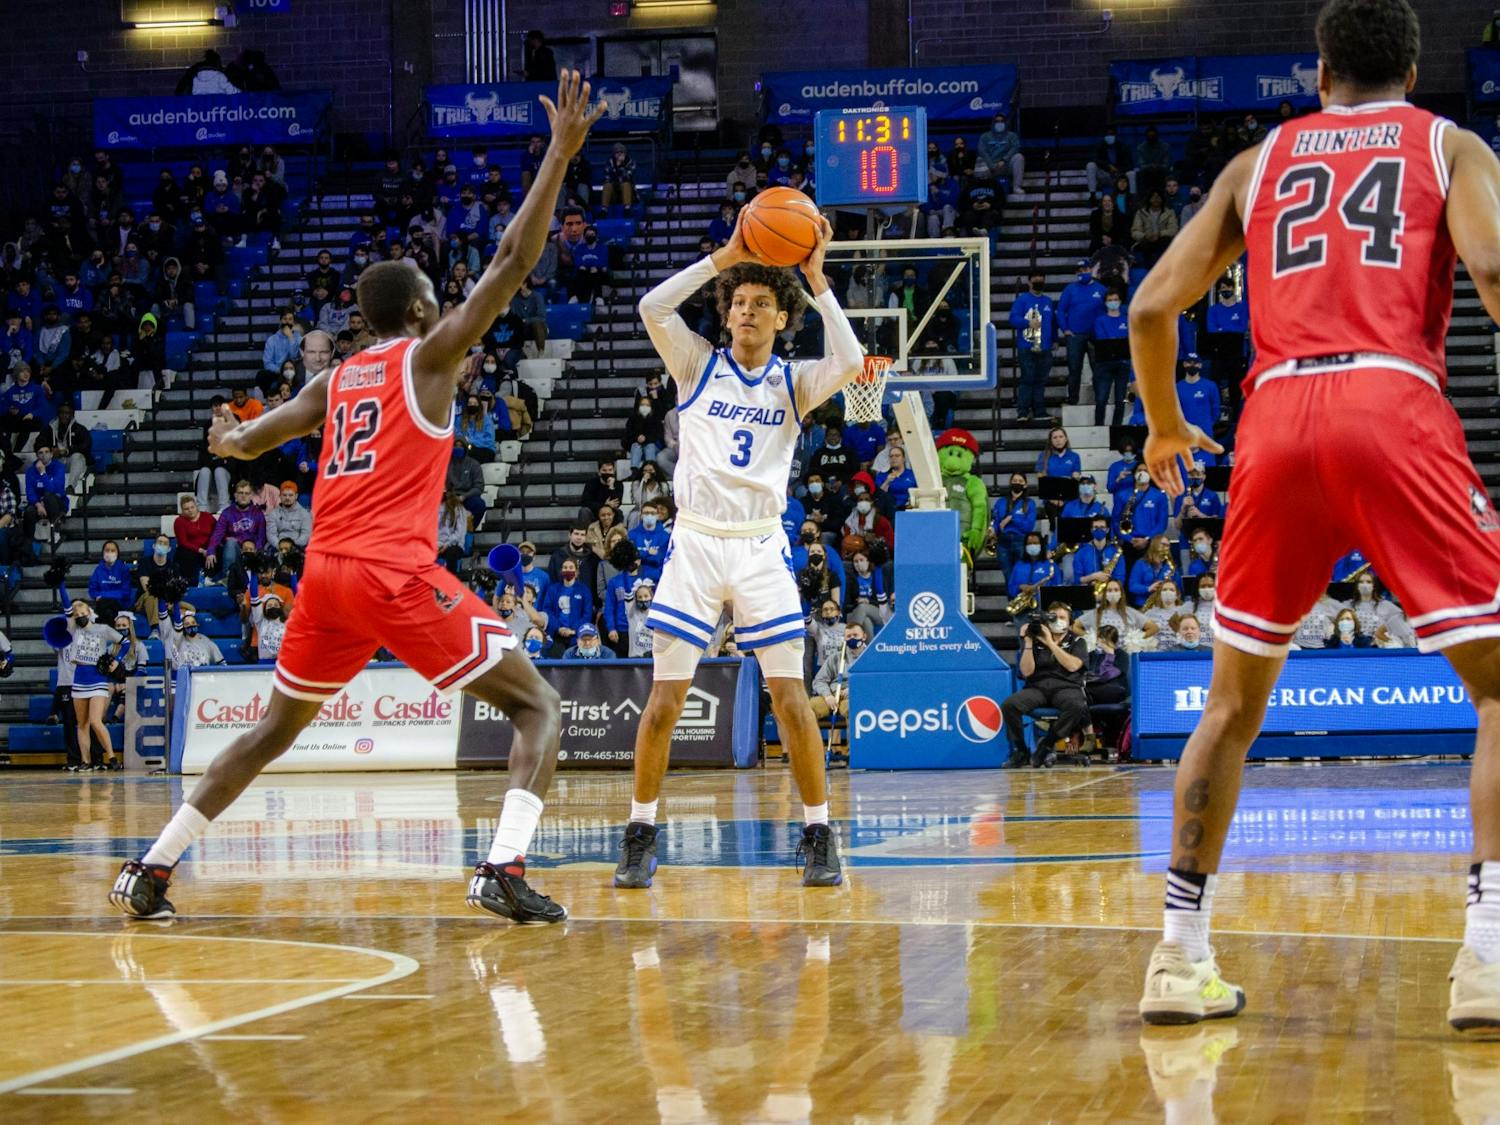 Curtis Jones scored 21 points in UB’s road victory against Northern Illinois Tuesday.